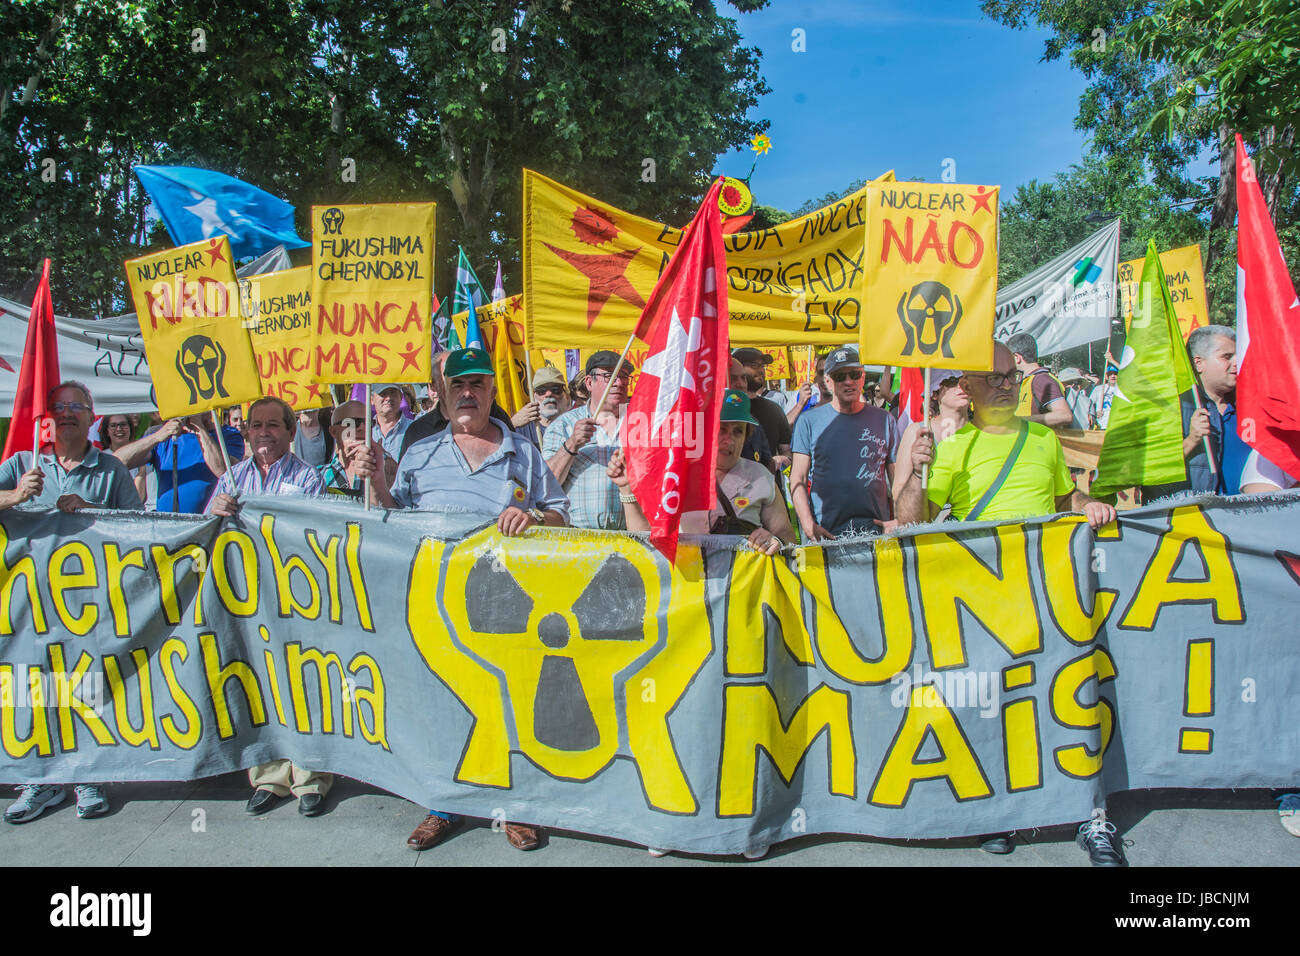 Madrid, Spain. 10th June, 2017. Demonstration agaisnt nuclear energy on the streets of Madrid, people form portugal and from spain demonstrates in the streets near of atocha train station Credit: Alberto Sibaja Ramírez/Alamy Live News Stock Photo